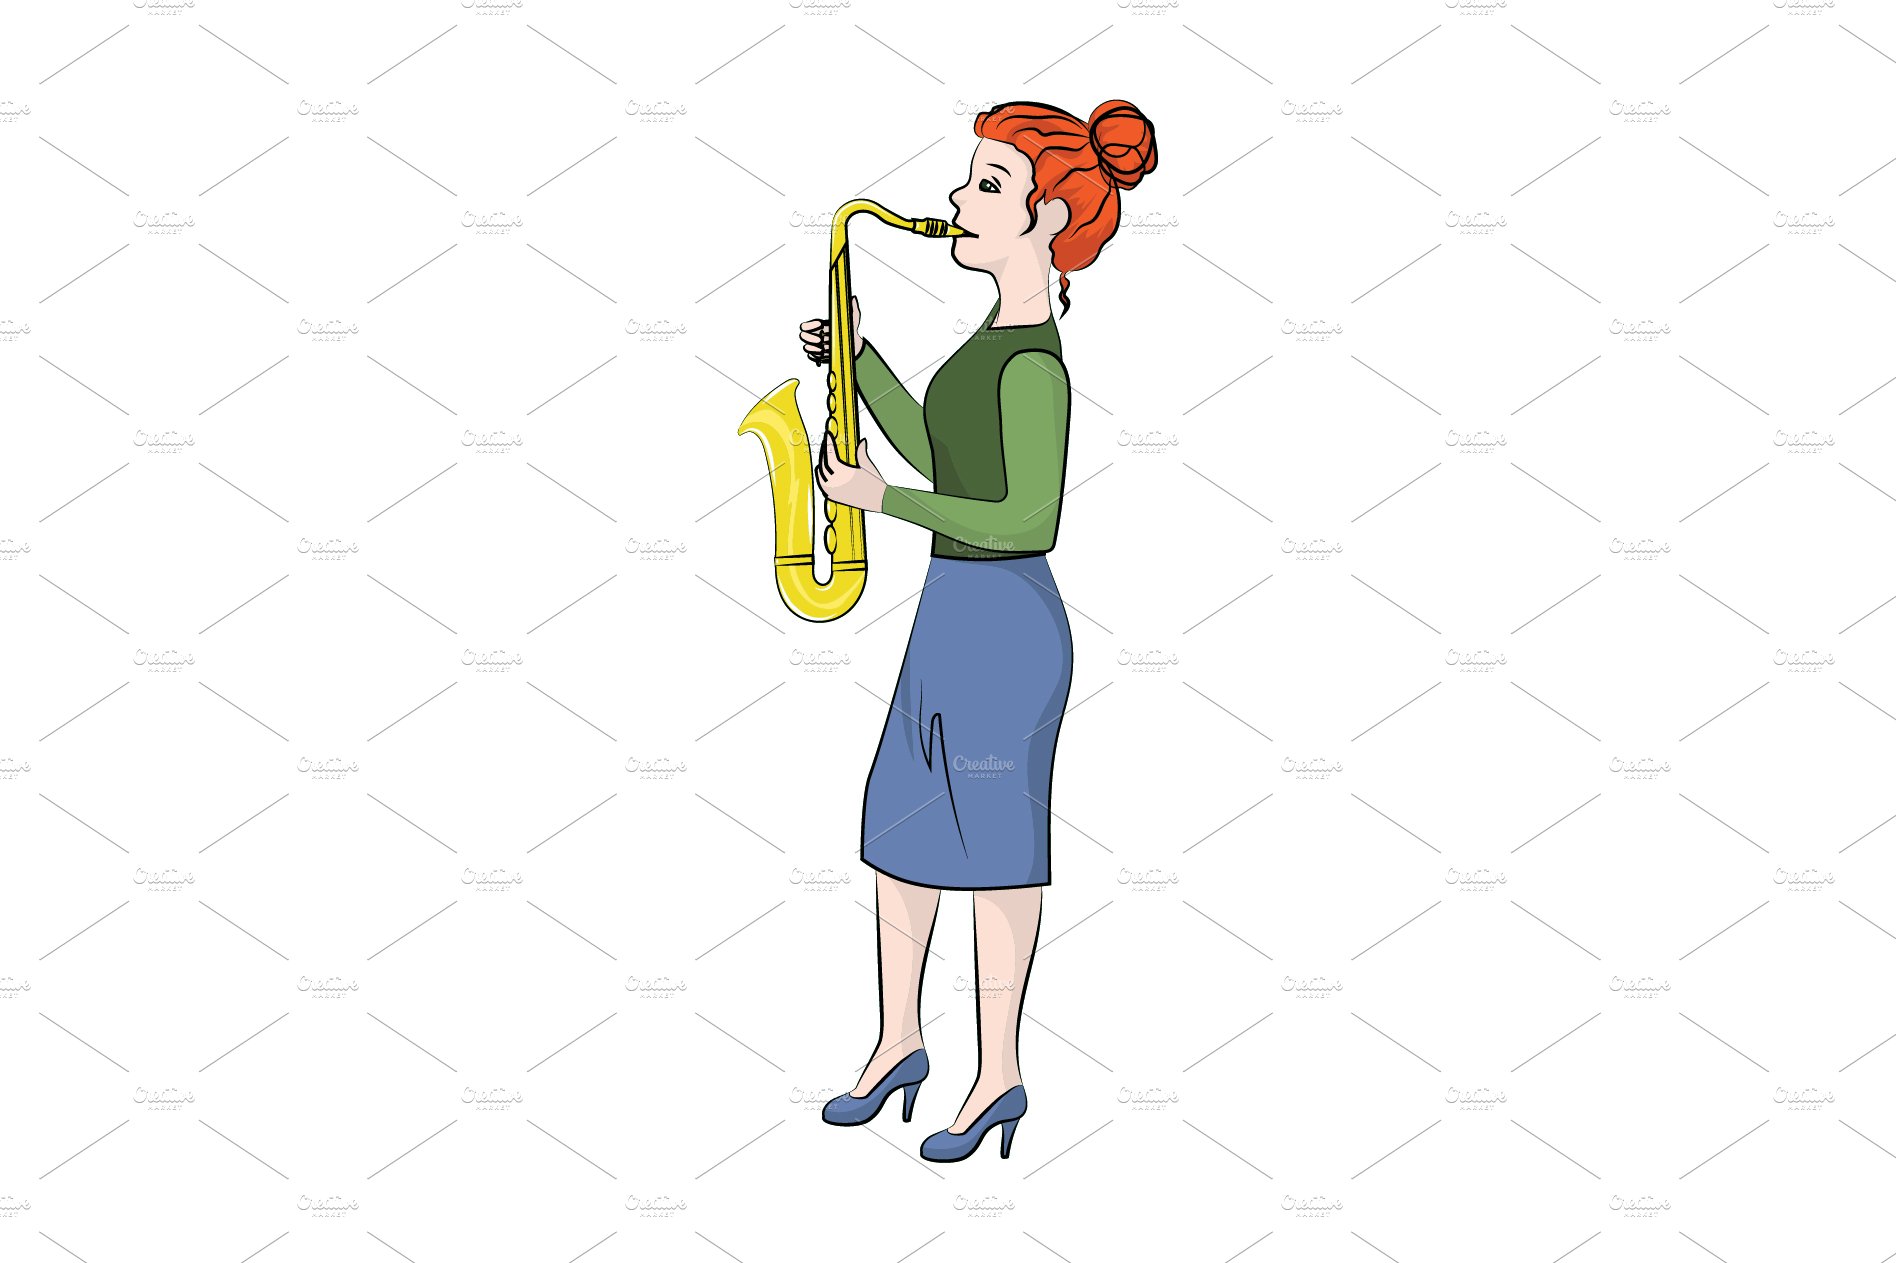 Girl (woman) plays the saxophone. cover image.